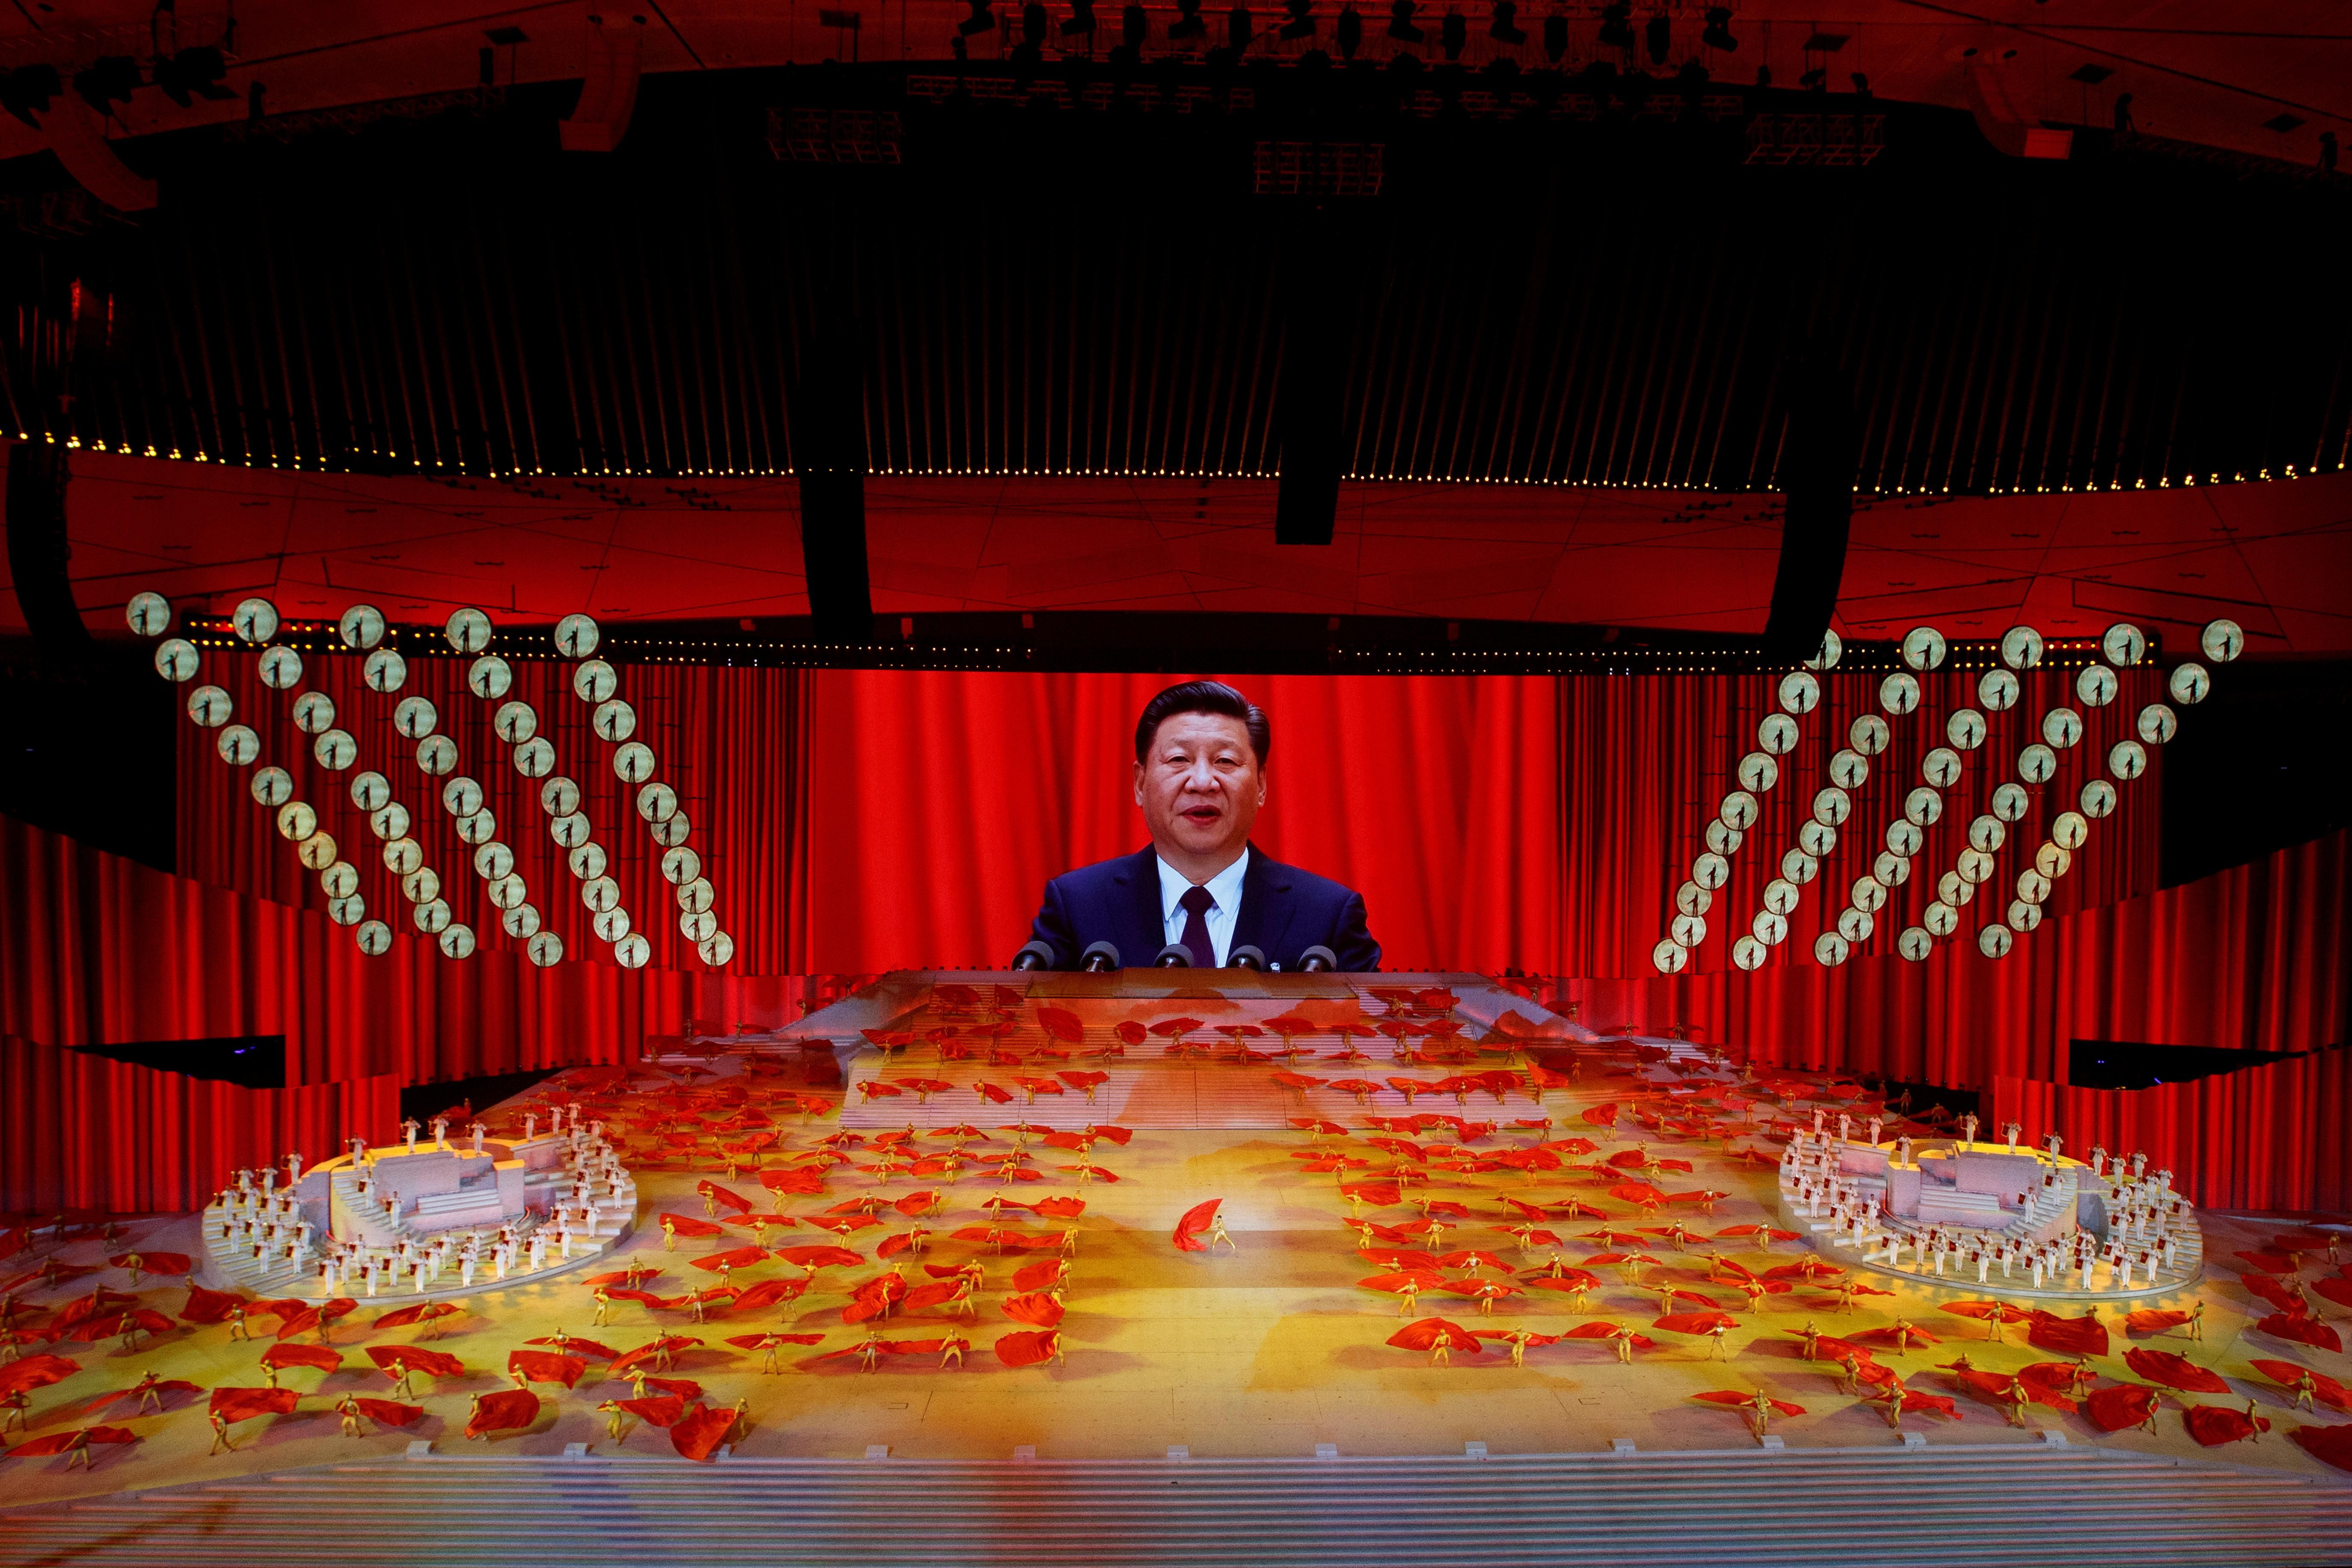 Why is Xi Jinping willing to slow down China’s economy?